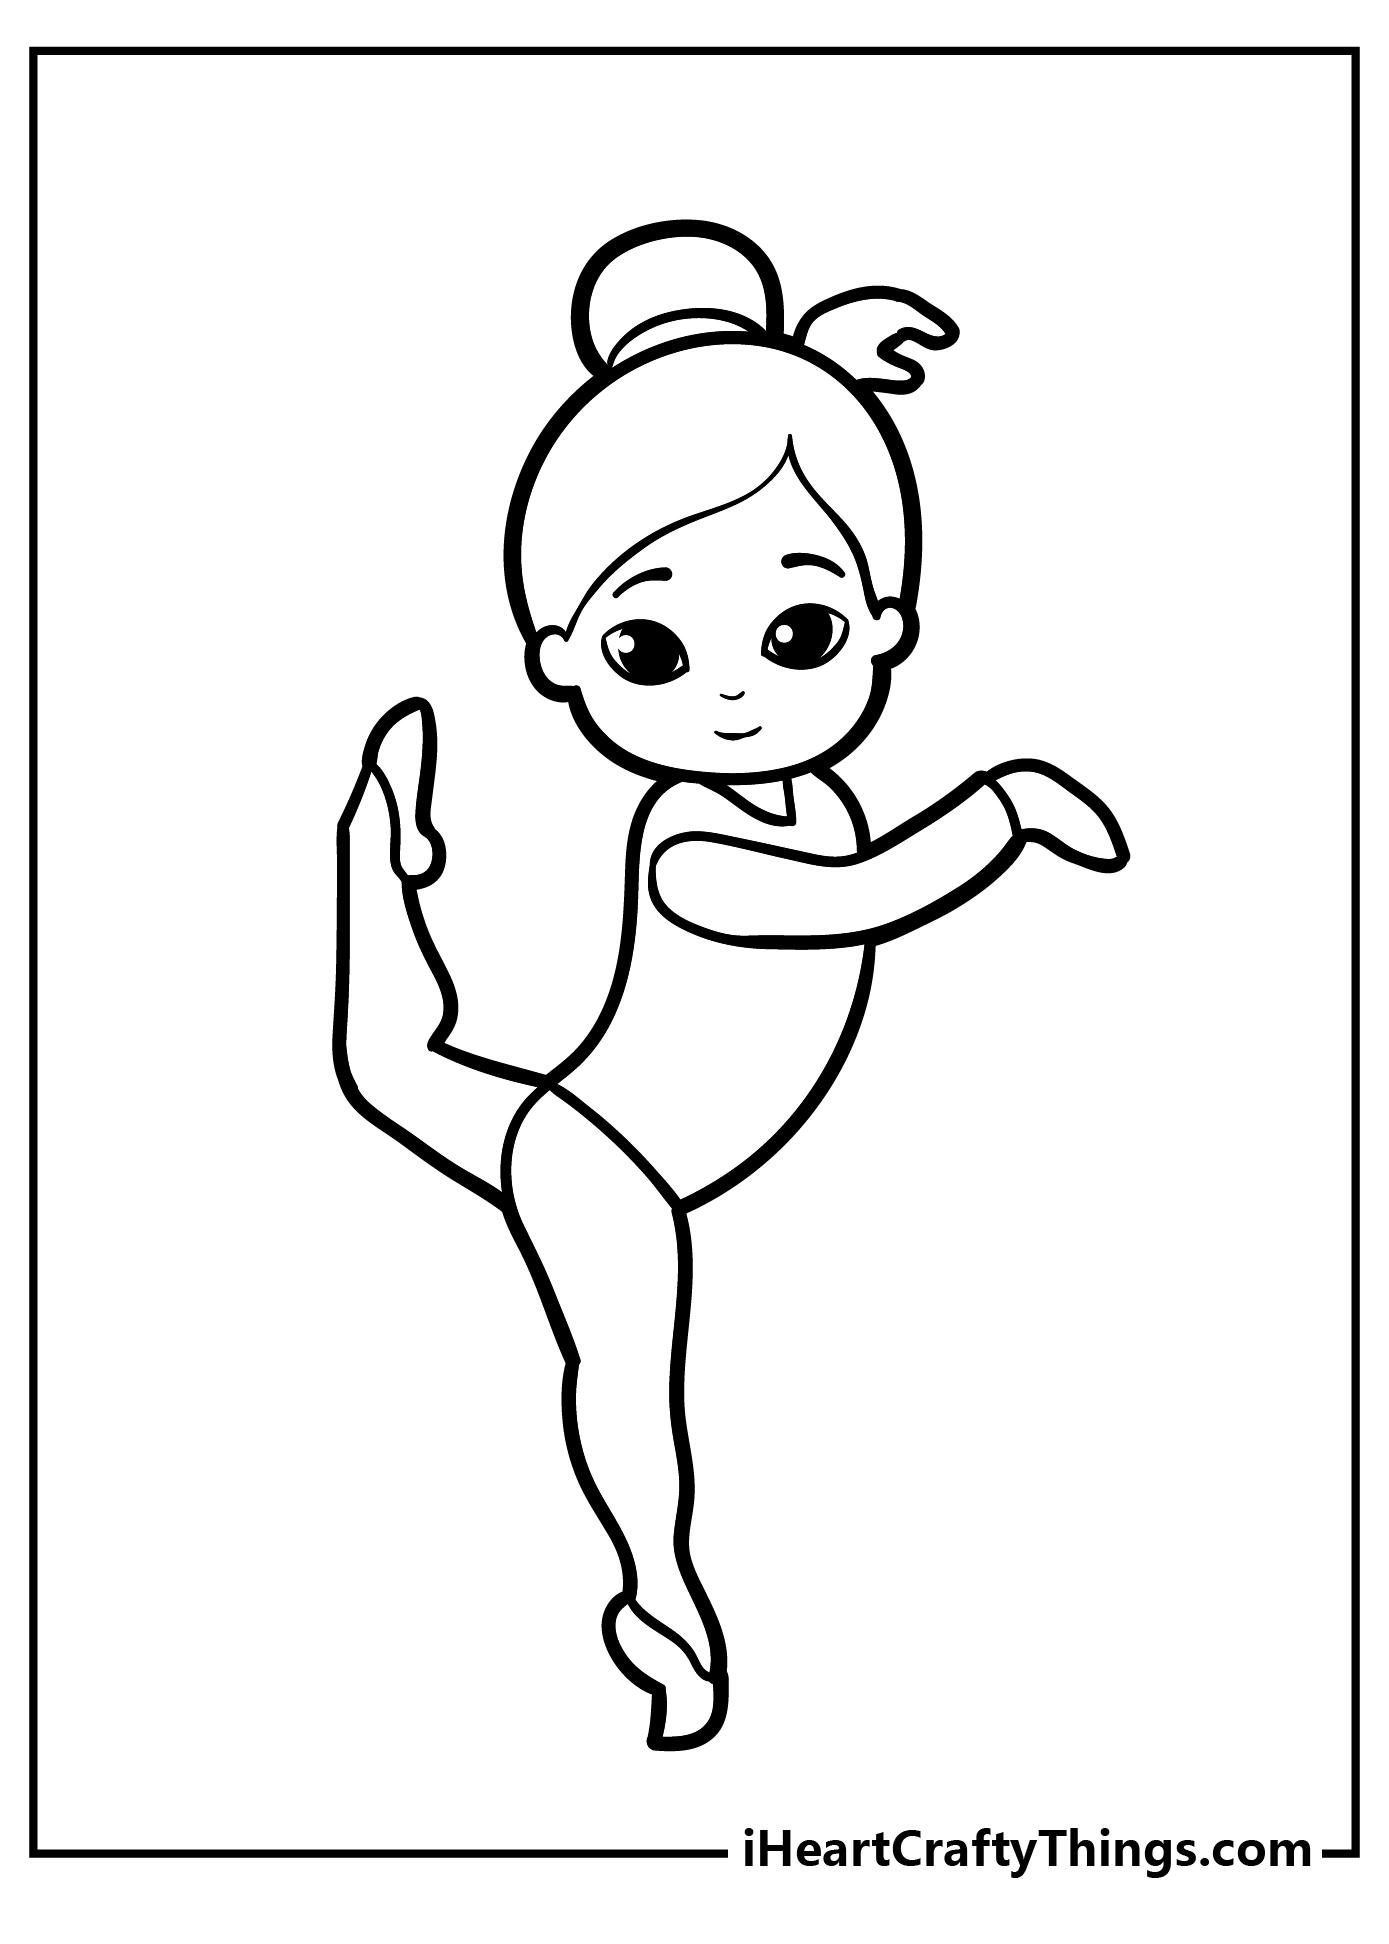 Gymnastics Coloring Pages for kids free download